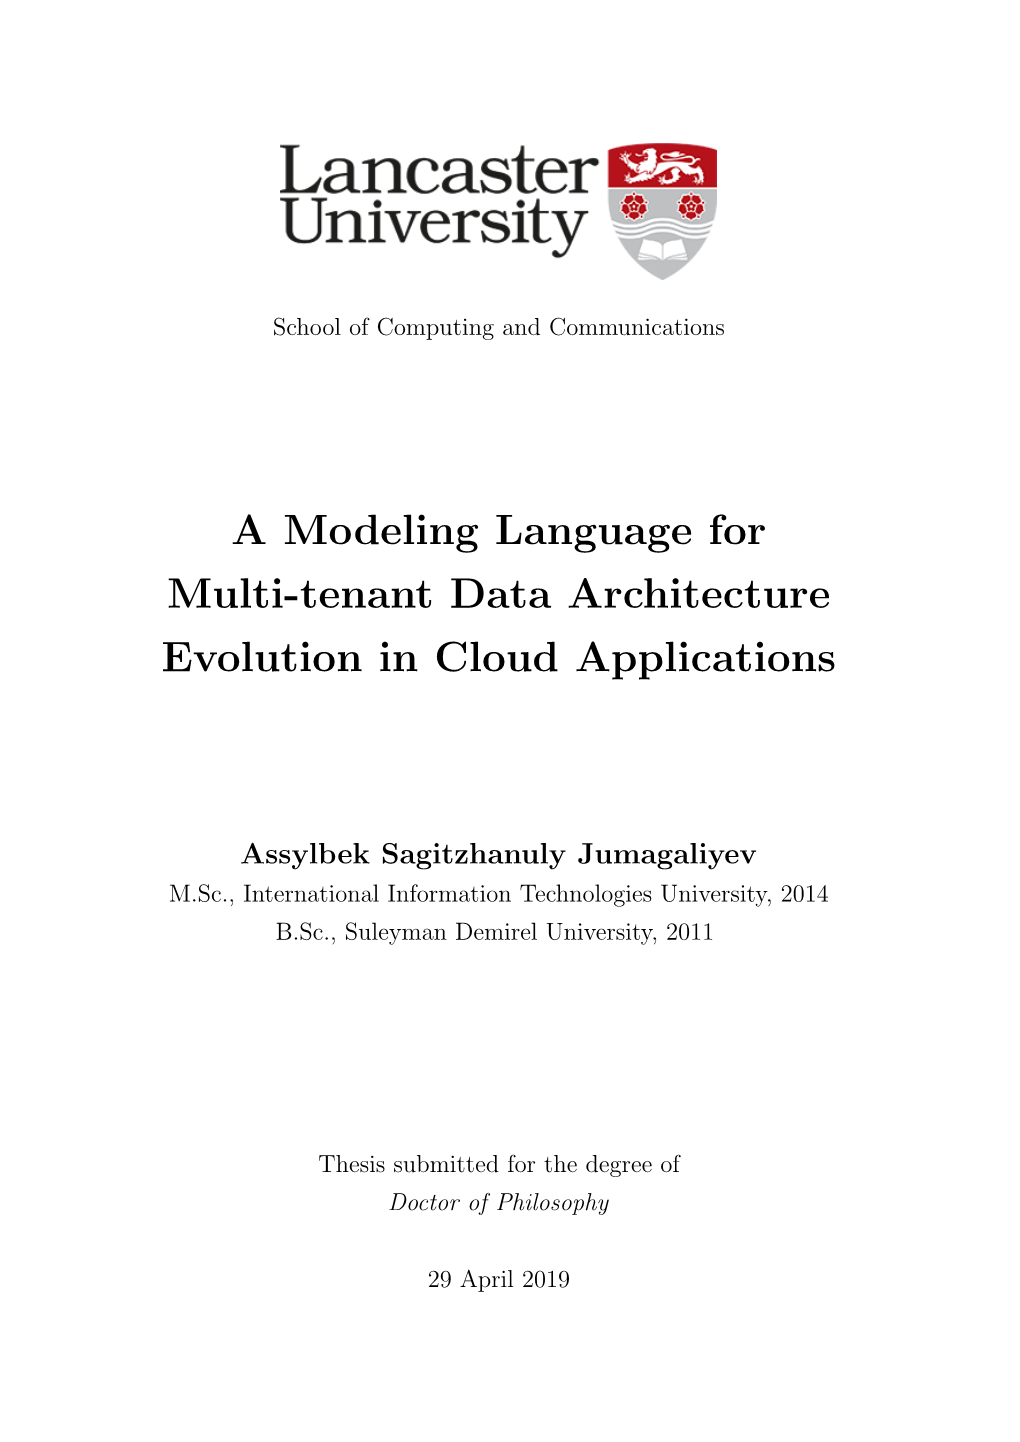 A Modeling Language for Multi-Tenant Data Architecture Evolution in Cloud Applications